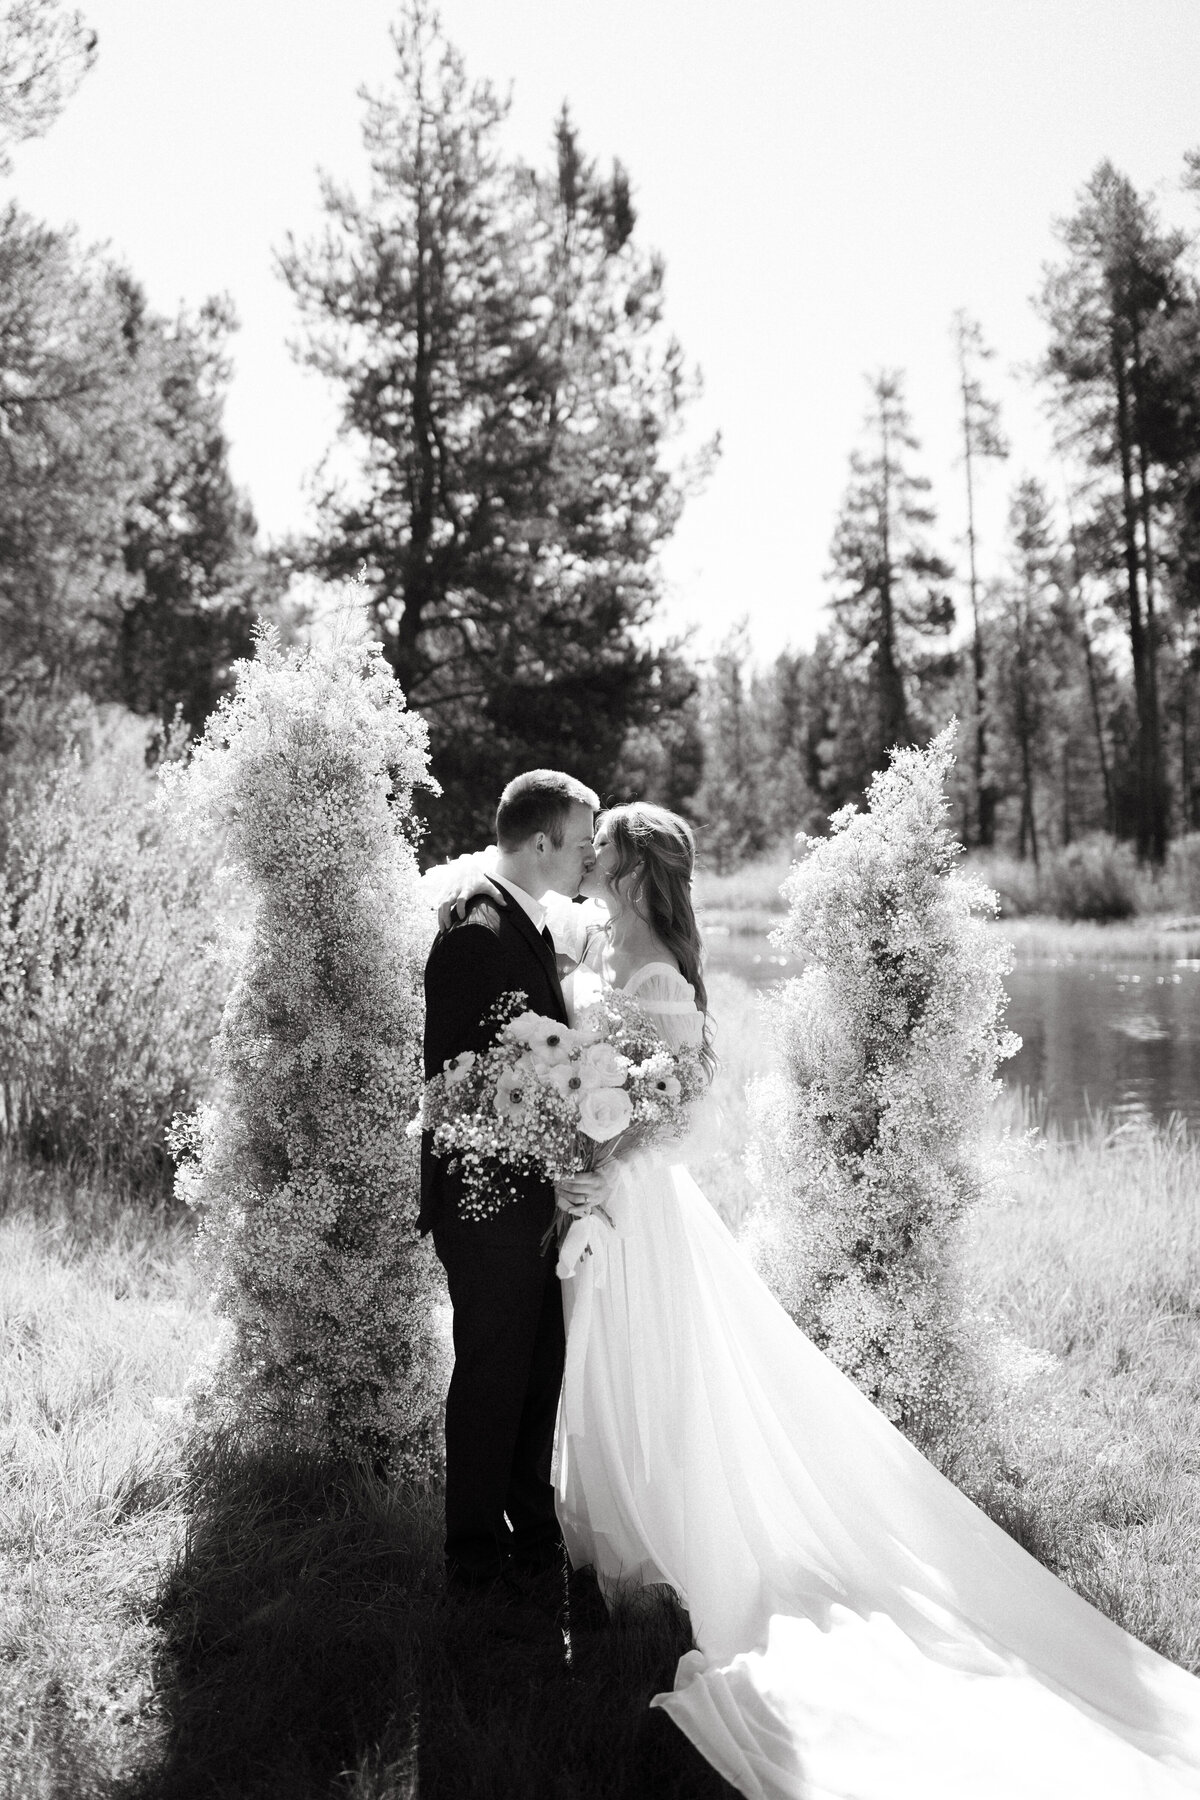 vintage_elopement_bend_oregon_united_states_cabin_whimsical_magical_forest_bridal_wedding_couple_trees_river_elegant_photography_by_taiya209